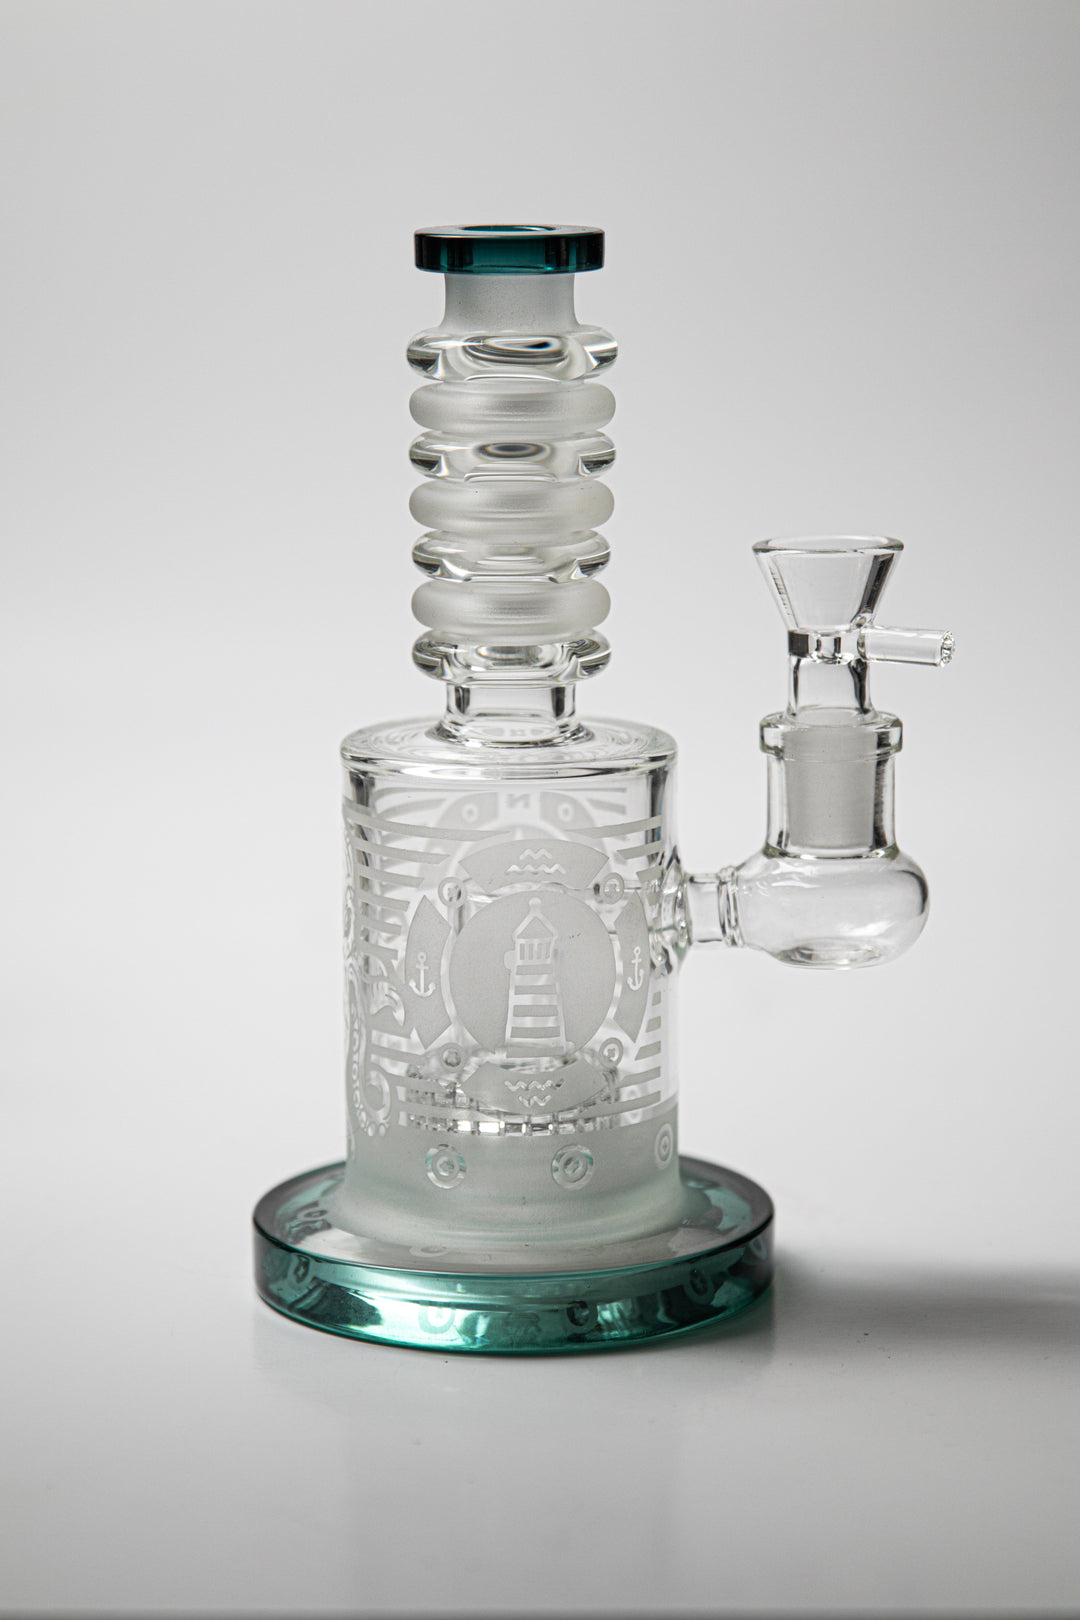 Unique 8.5-inch Sanded Water Pipe NECK MATRIX PERC RIG,equipped with a male 14mm weed bowl . It’s come with A clear base sand blast design an a teal bottom , teal mouth opening 